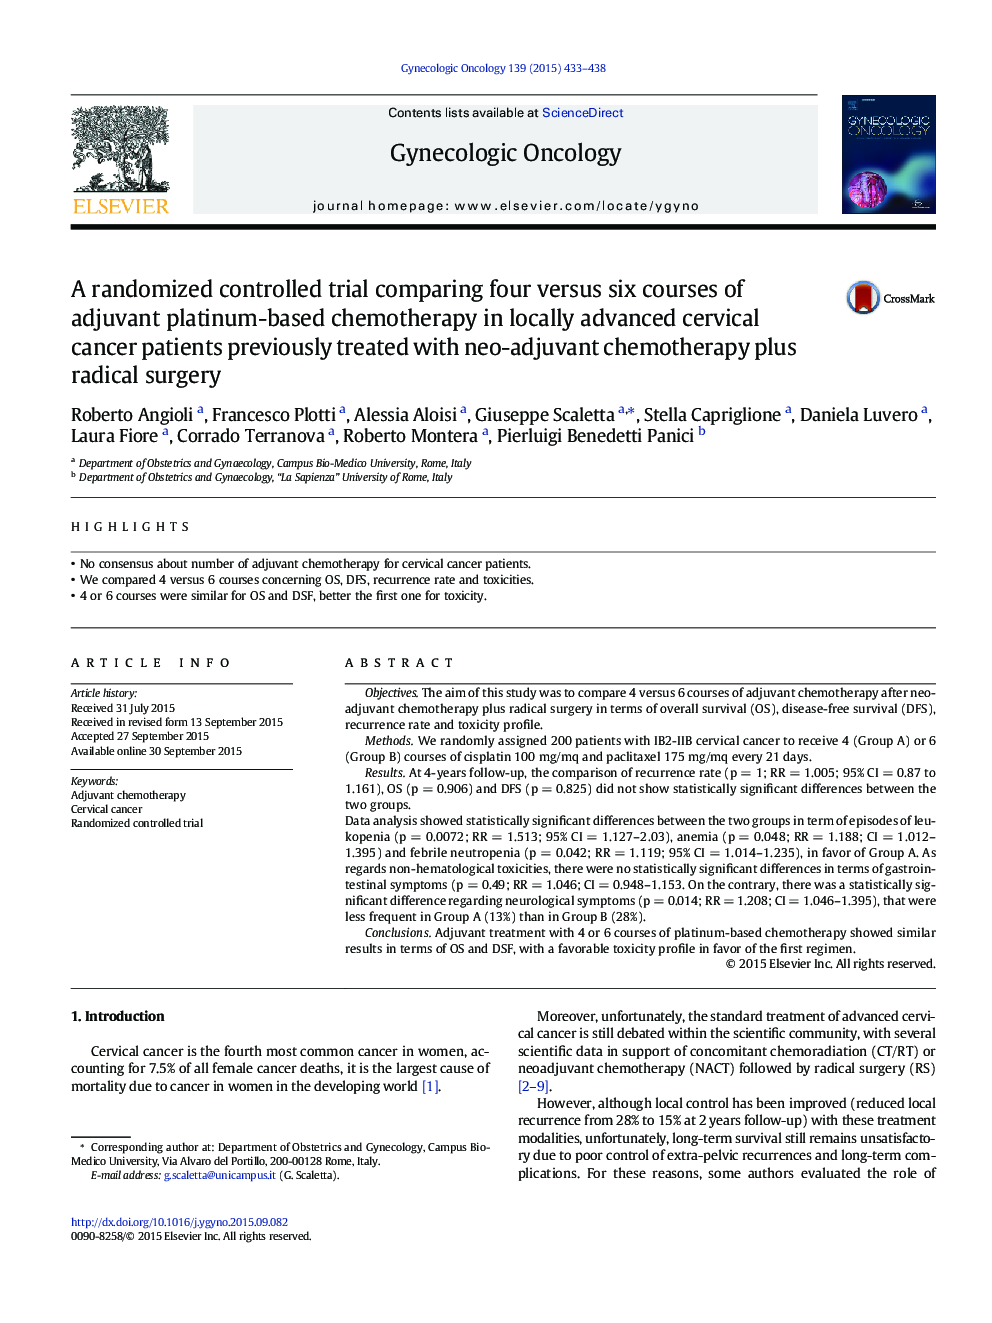 A randomized controlled trial comparing four versus six courses of adjuvant platinum-based chemotherapy in locally advanced cervical cancer patients previously treated with neo-adjuvant chemotherapy plus radical surgery